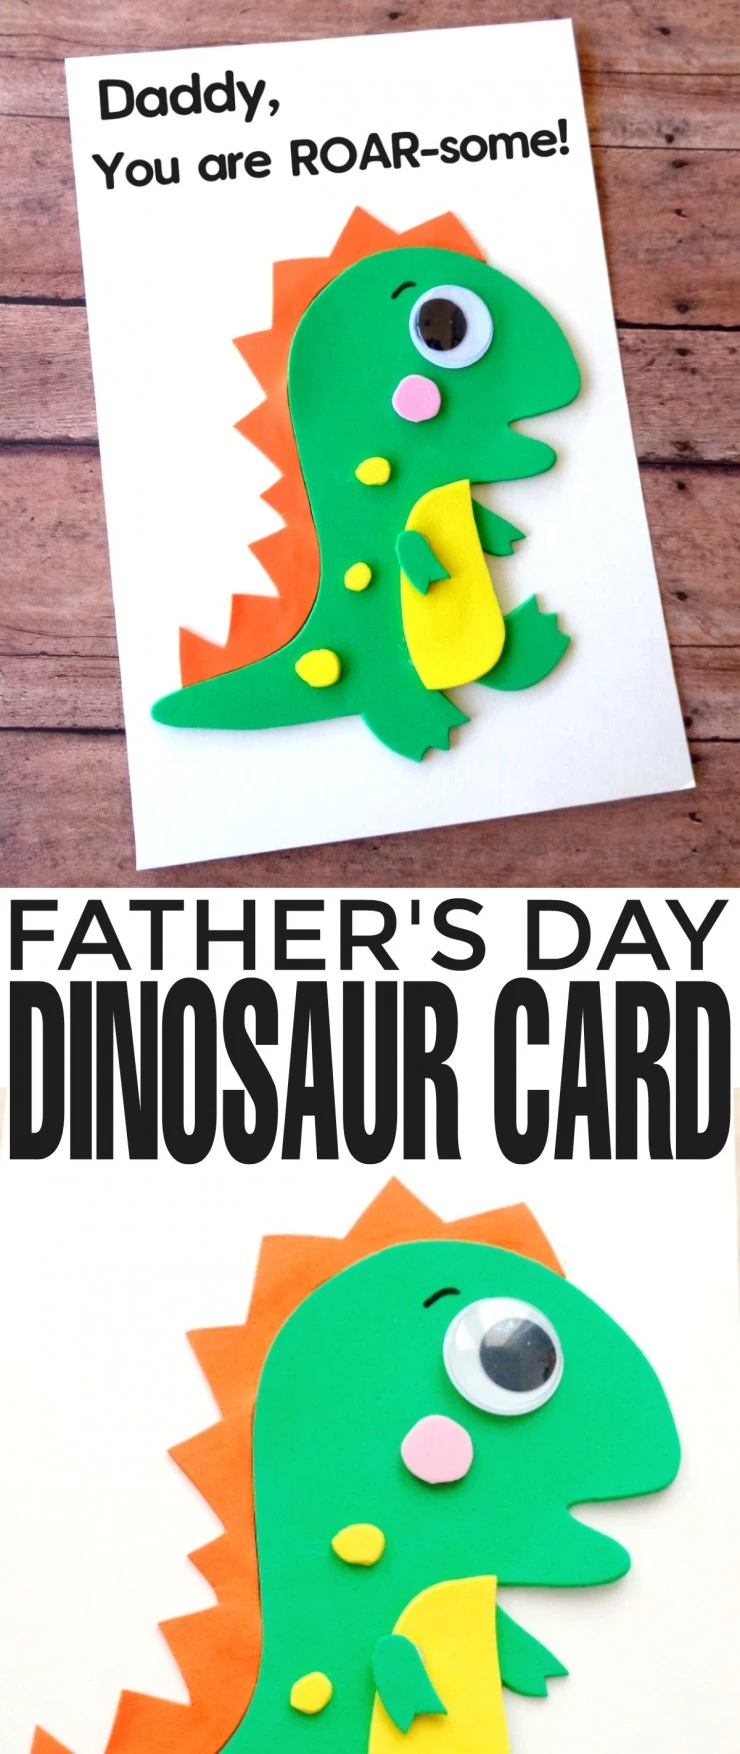 Father’s Day is coming up and while it can be difficult to figure out what colour of tie to get for Dad for Father’s Day, a hand made card is always going to be a hit. This DIY Father’s Day Dinosaur Card is the perfect way to show Dad that he is ROAR-SOME!